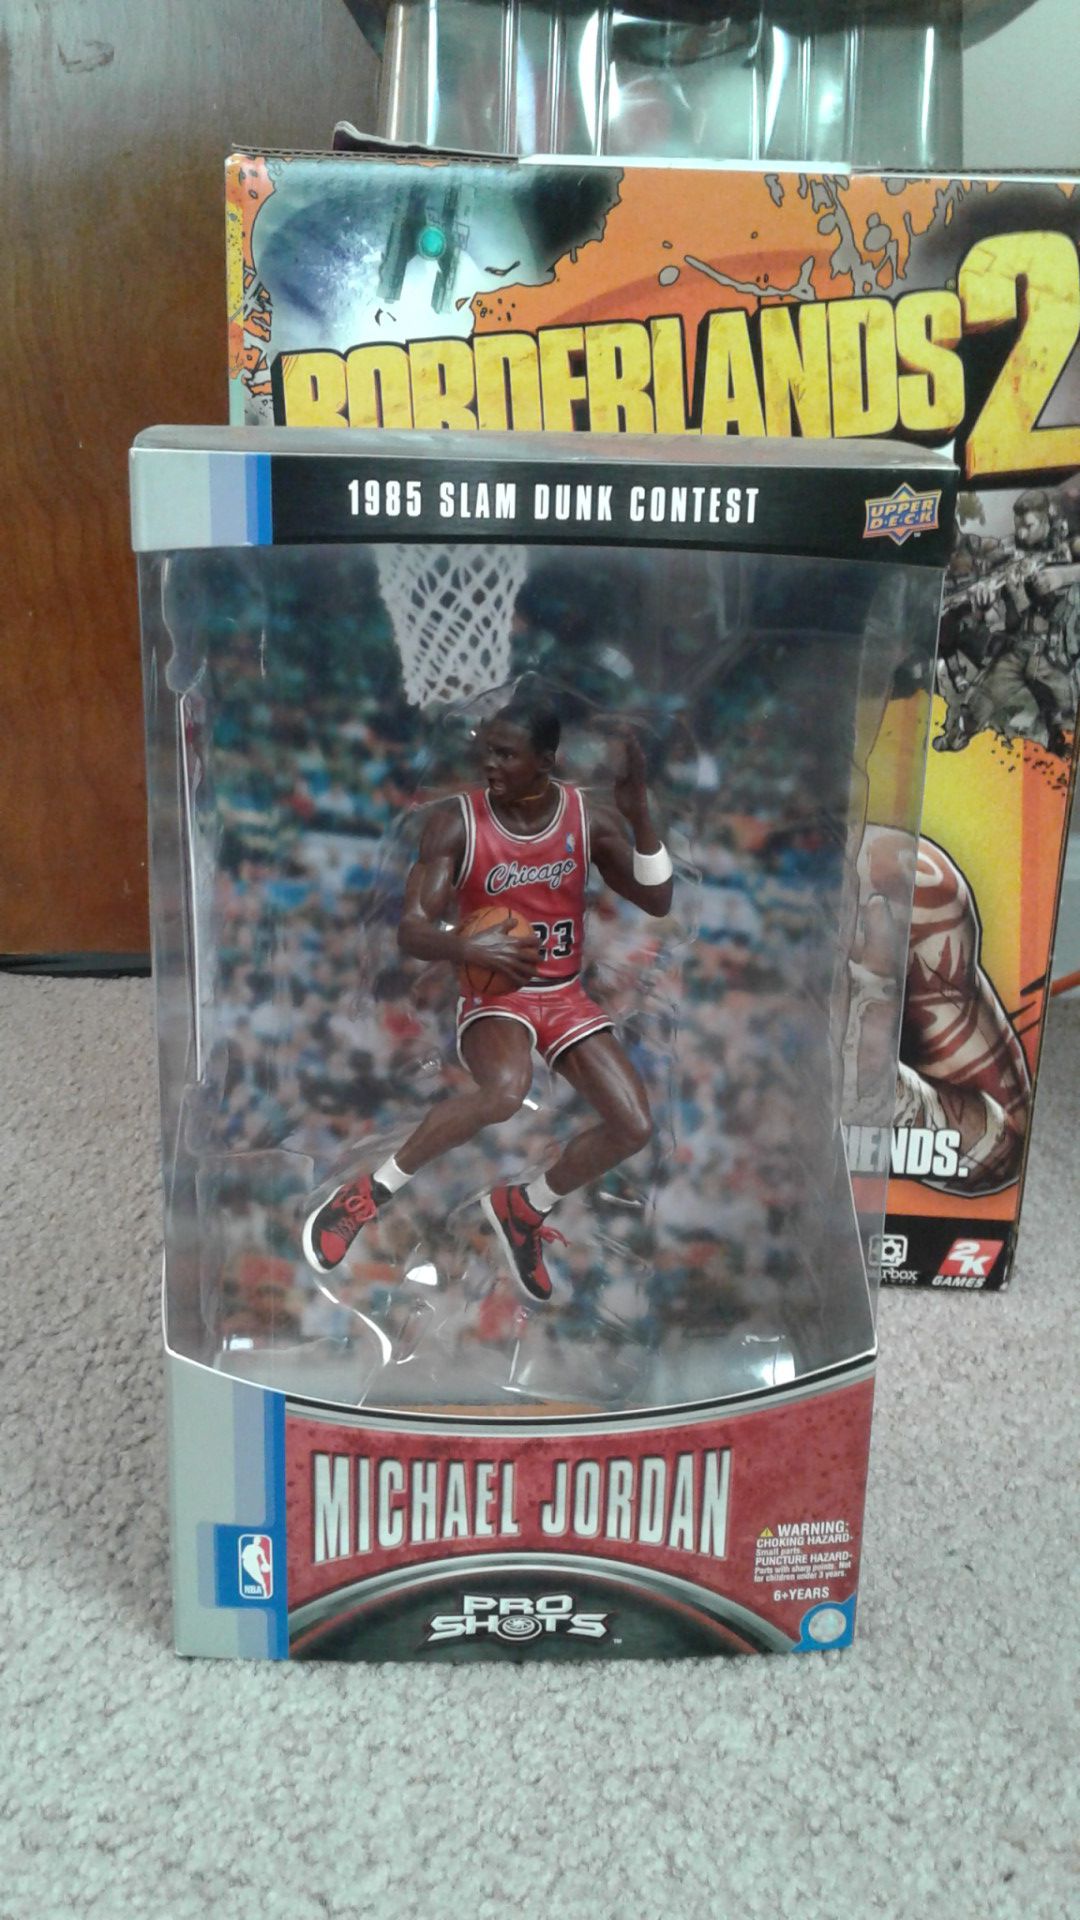 MJ 1885 dunk contest collectable